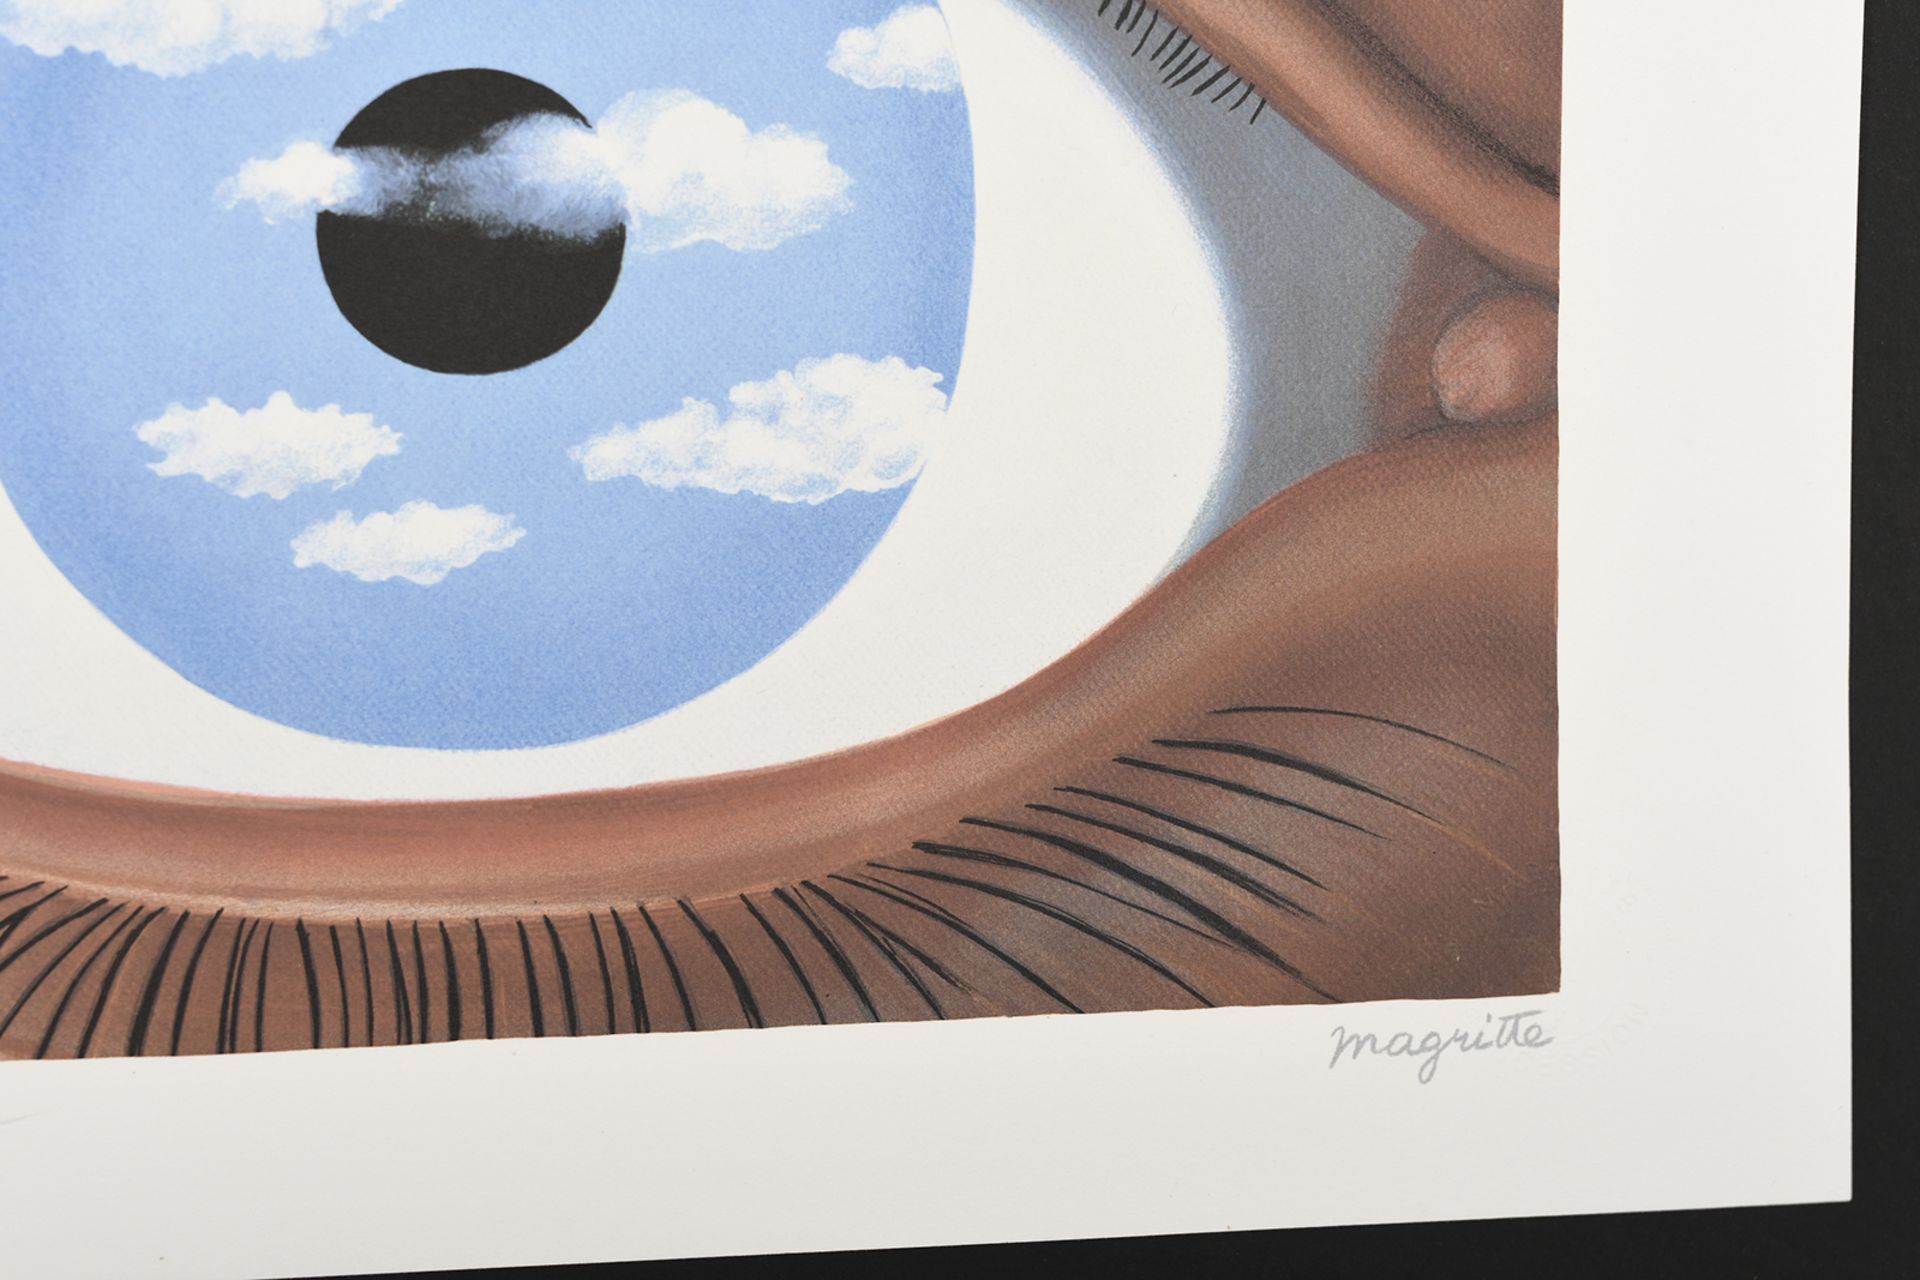 Limited Edition Magritte - Image 5 of 5